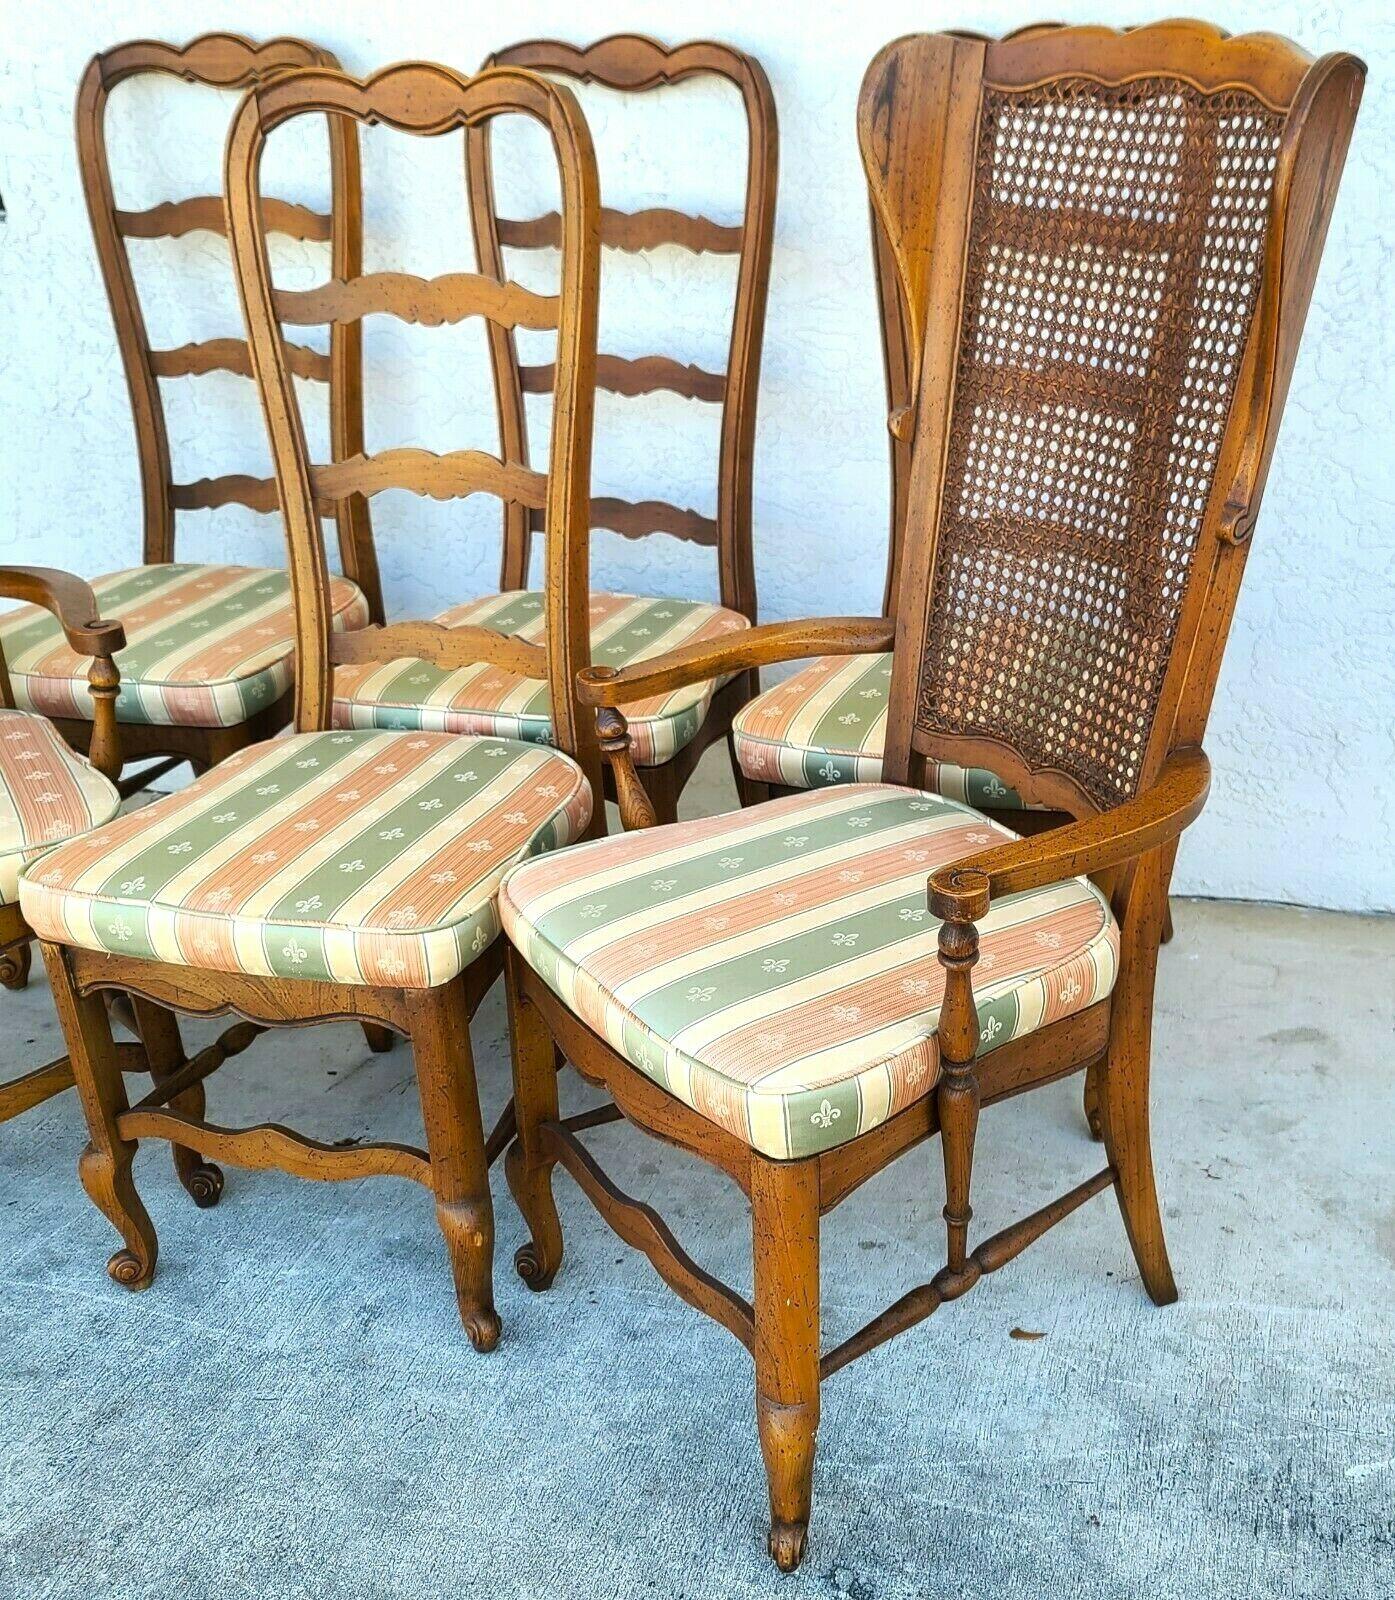 For full item description be sure to click on CONTINUE READING at the bottom of this listing.

Offering one of our recent Palm beach estate fine furniture acquisitions of a
set of 6 vintage French country oak dining chairs
set includes 4